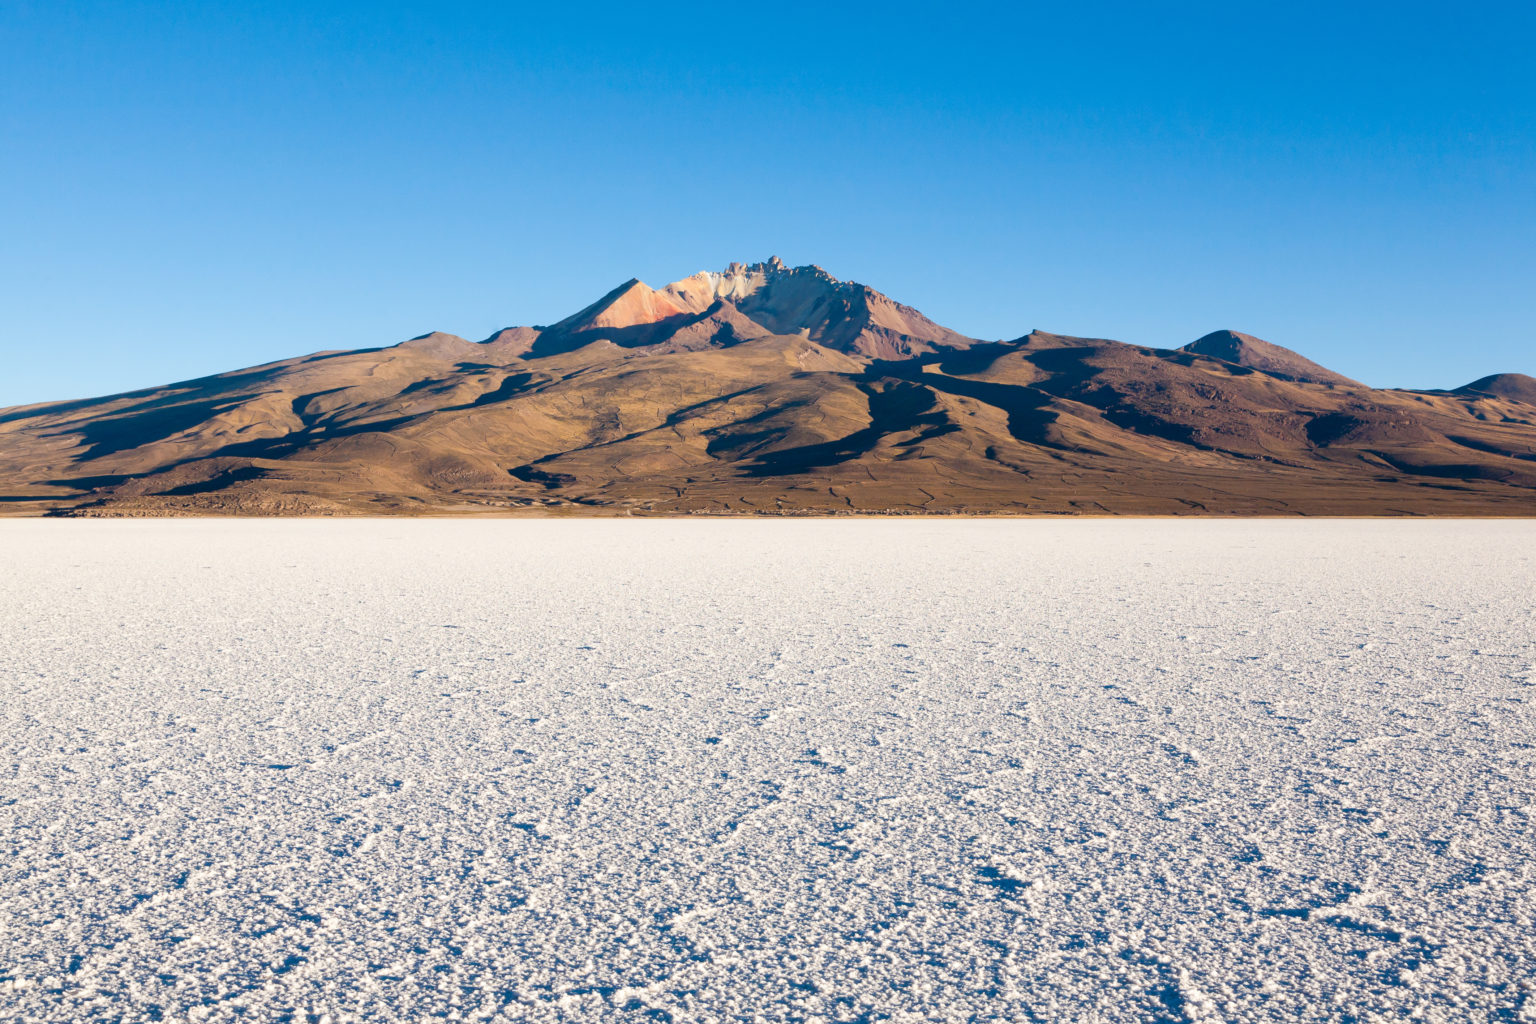 Advance Lithium in joint venture talks with Mexico’s national lithium company